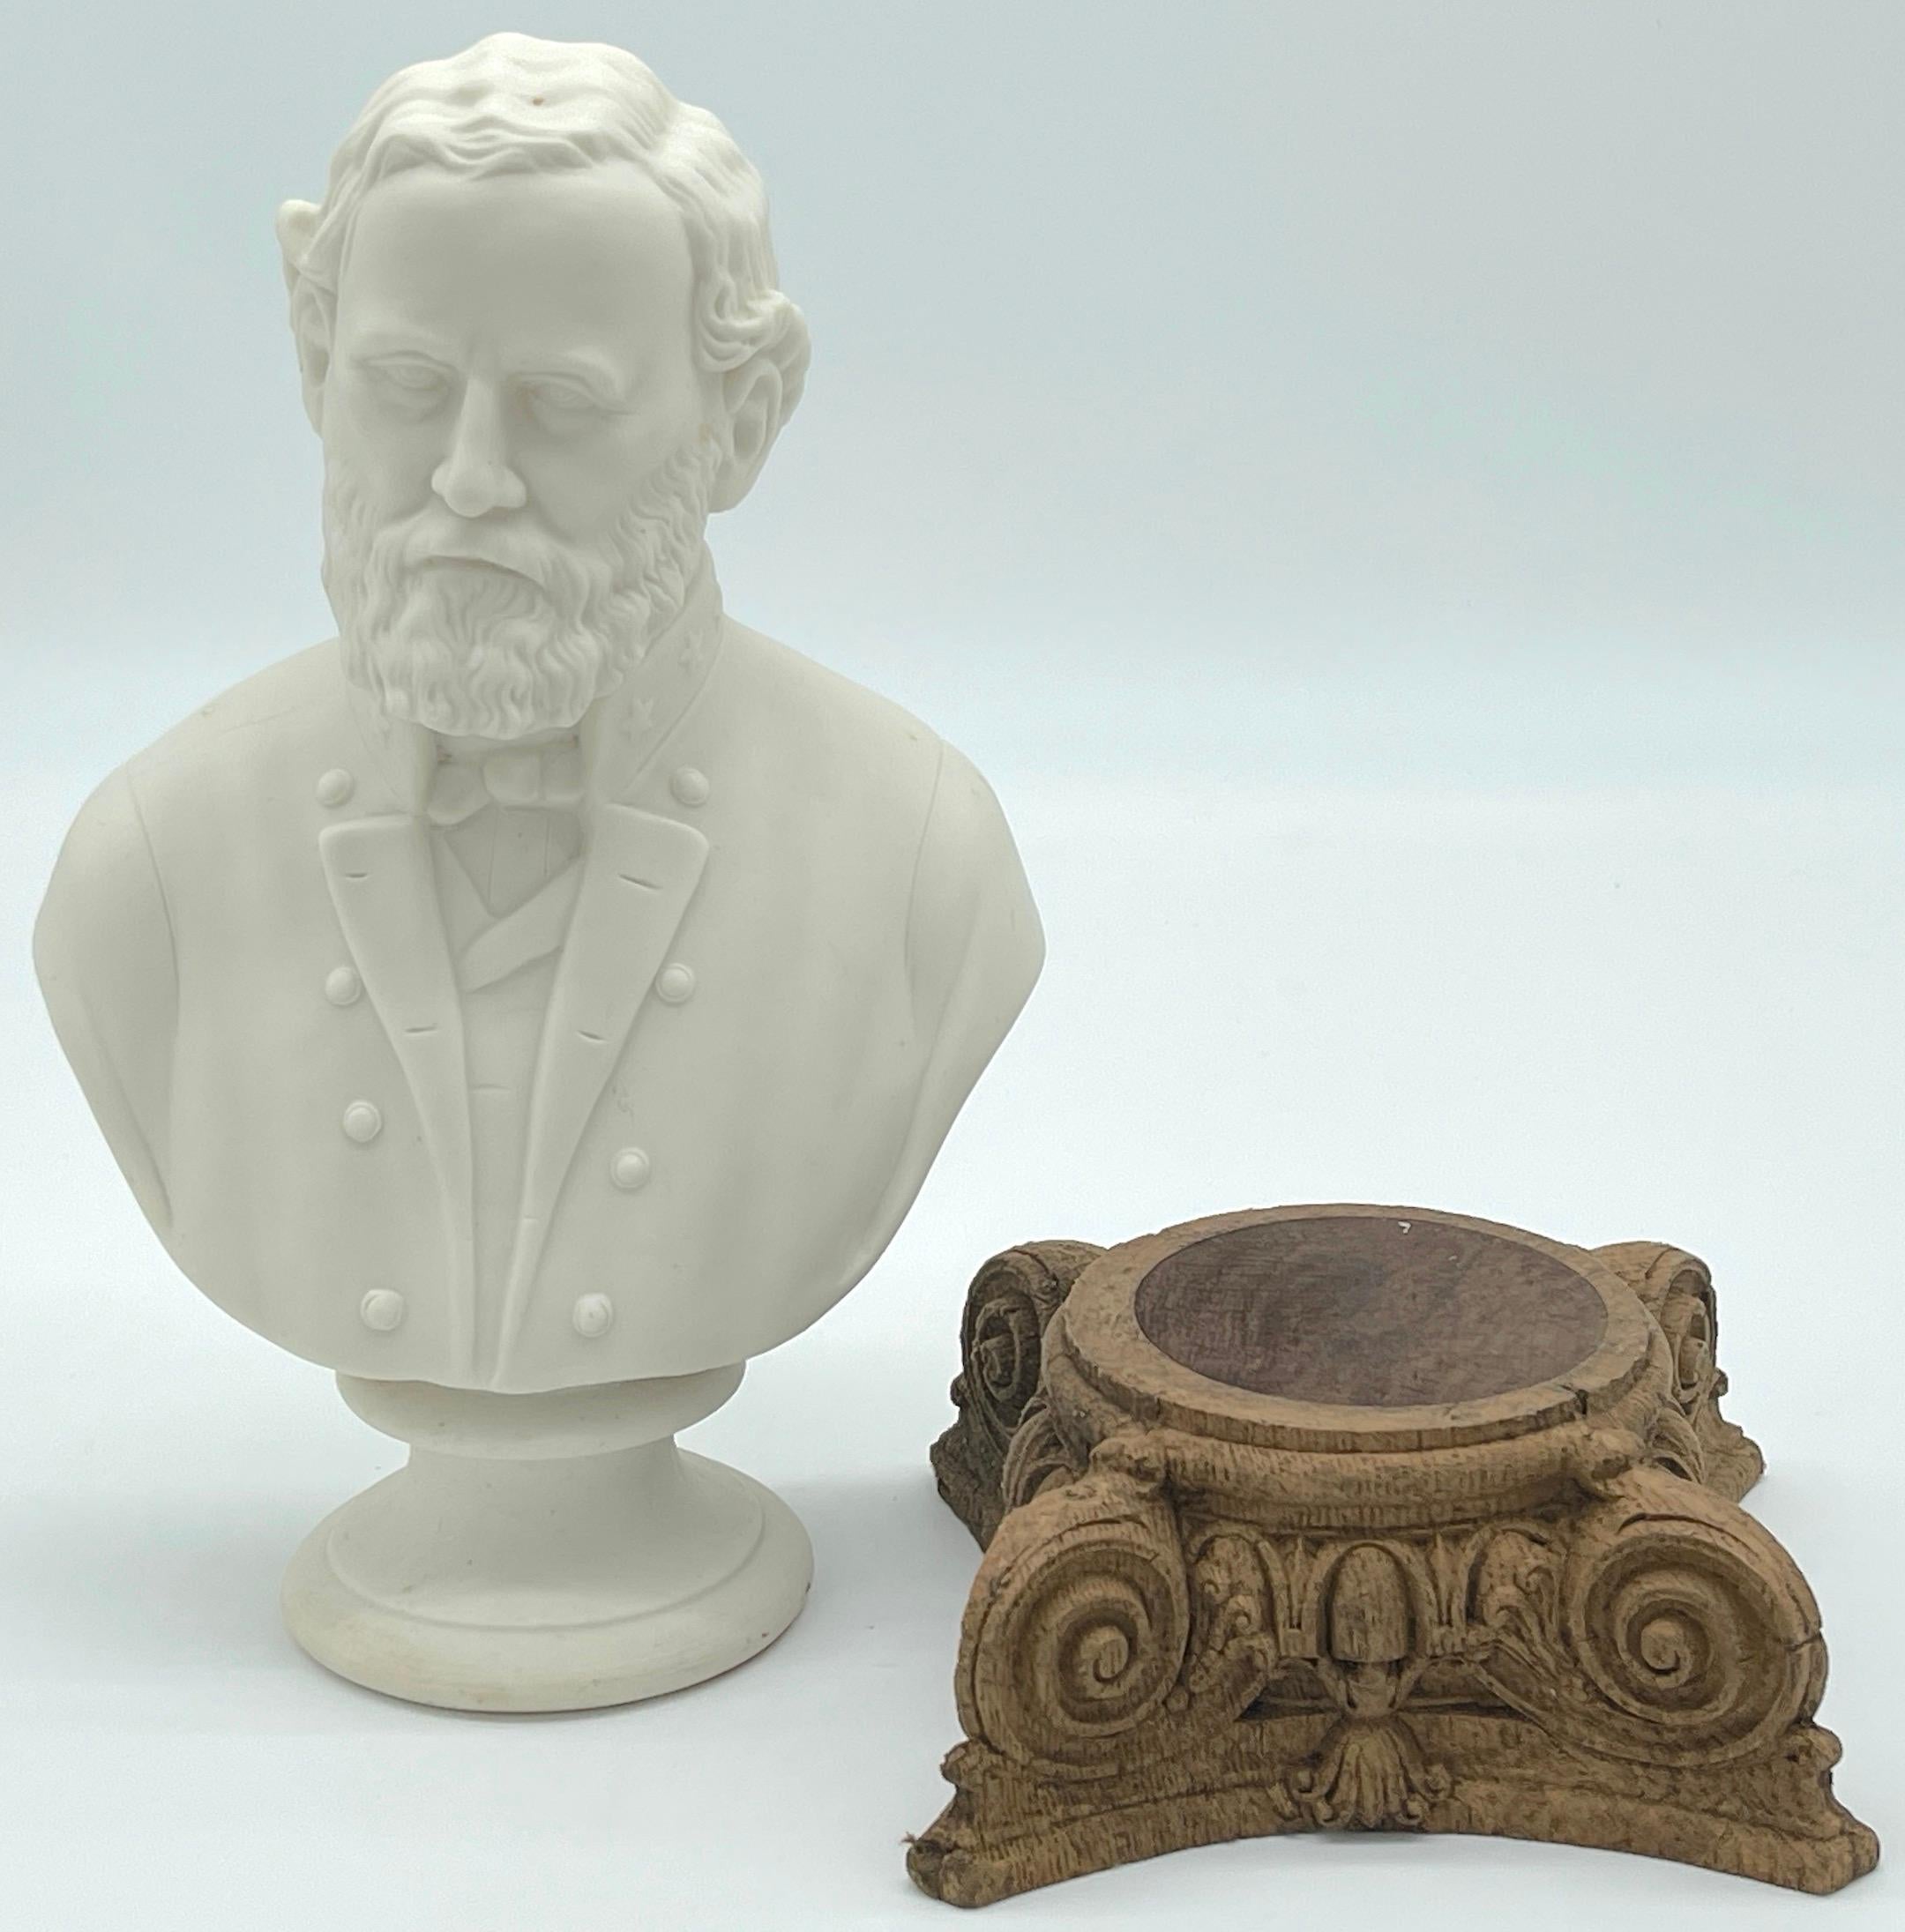 Porcelain Parian Bust of Confederate General Robert E. Lee on Carved Neoclassical Base